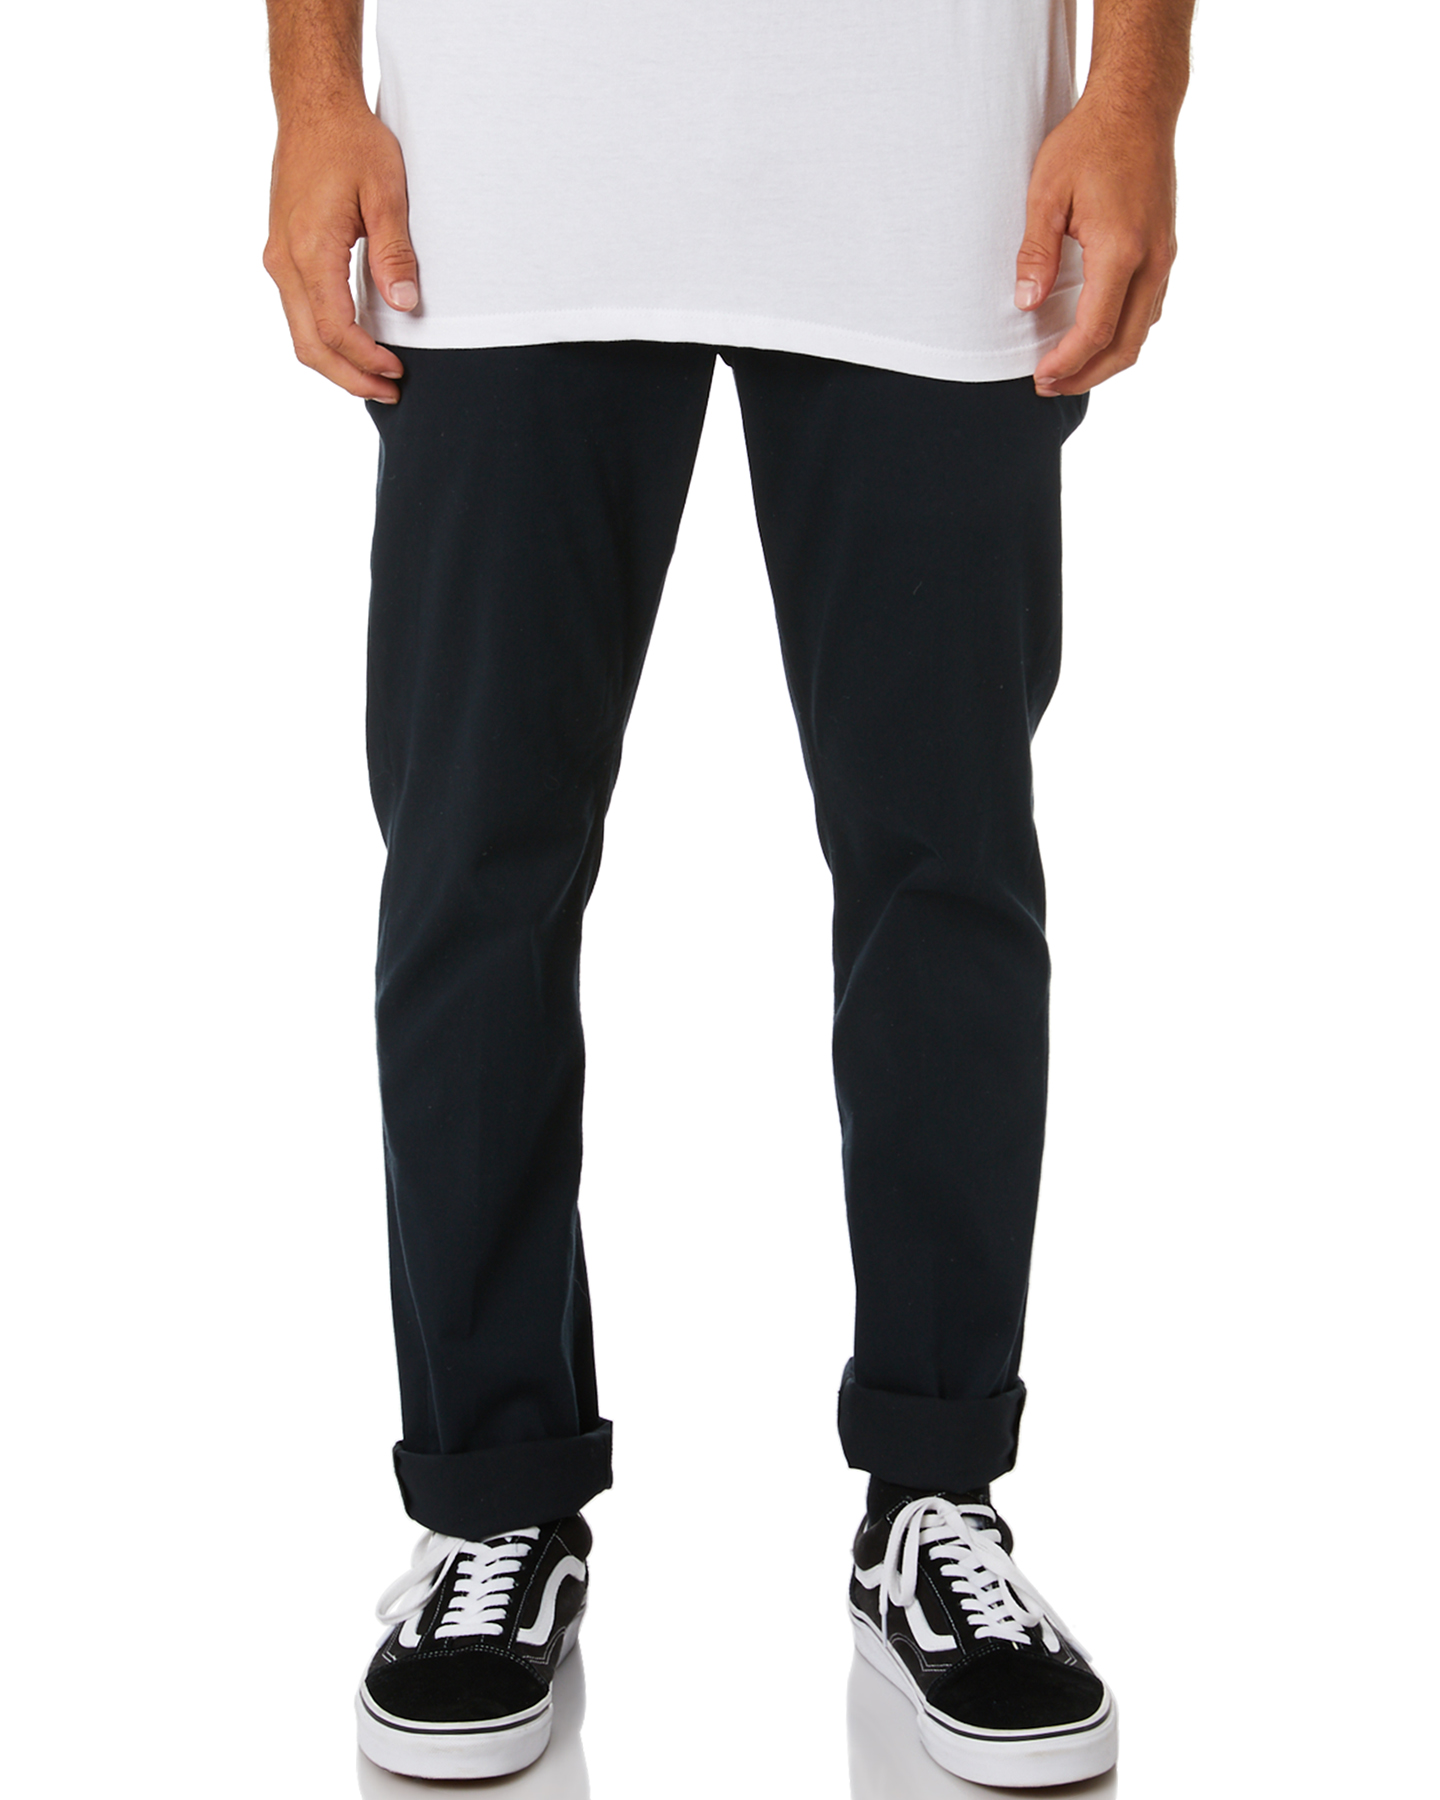 hurley dri fit worker pants review